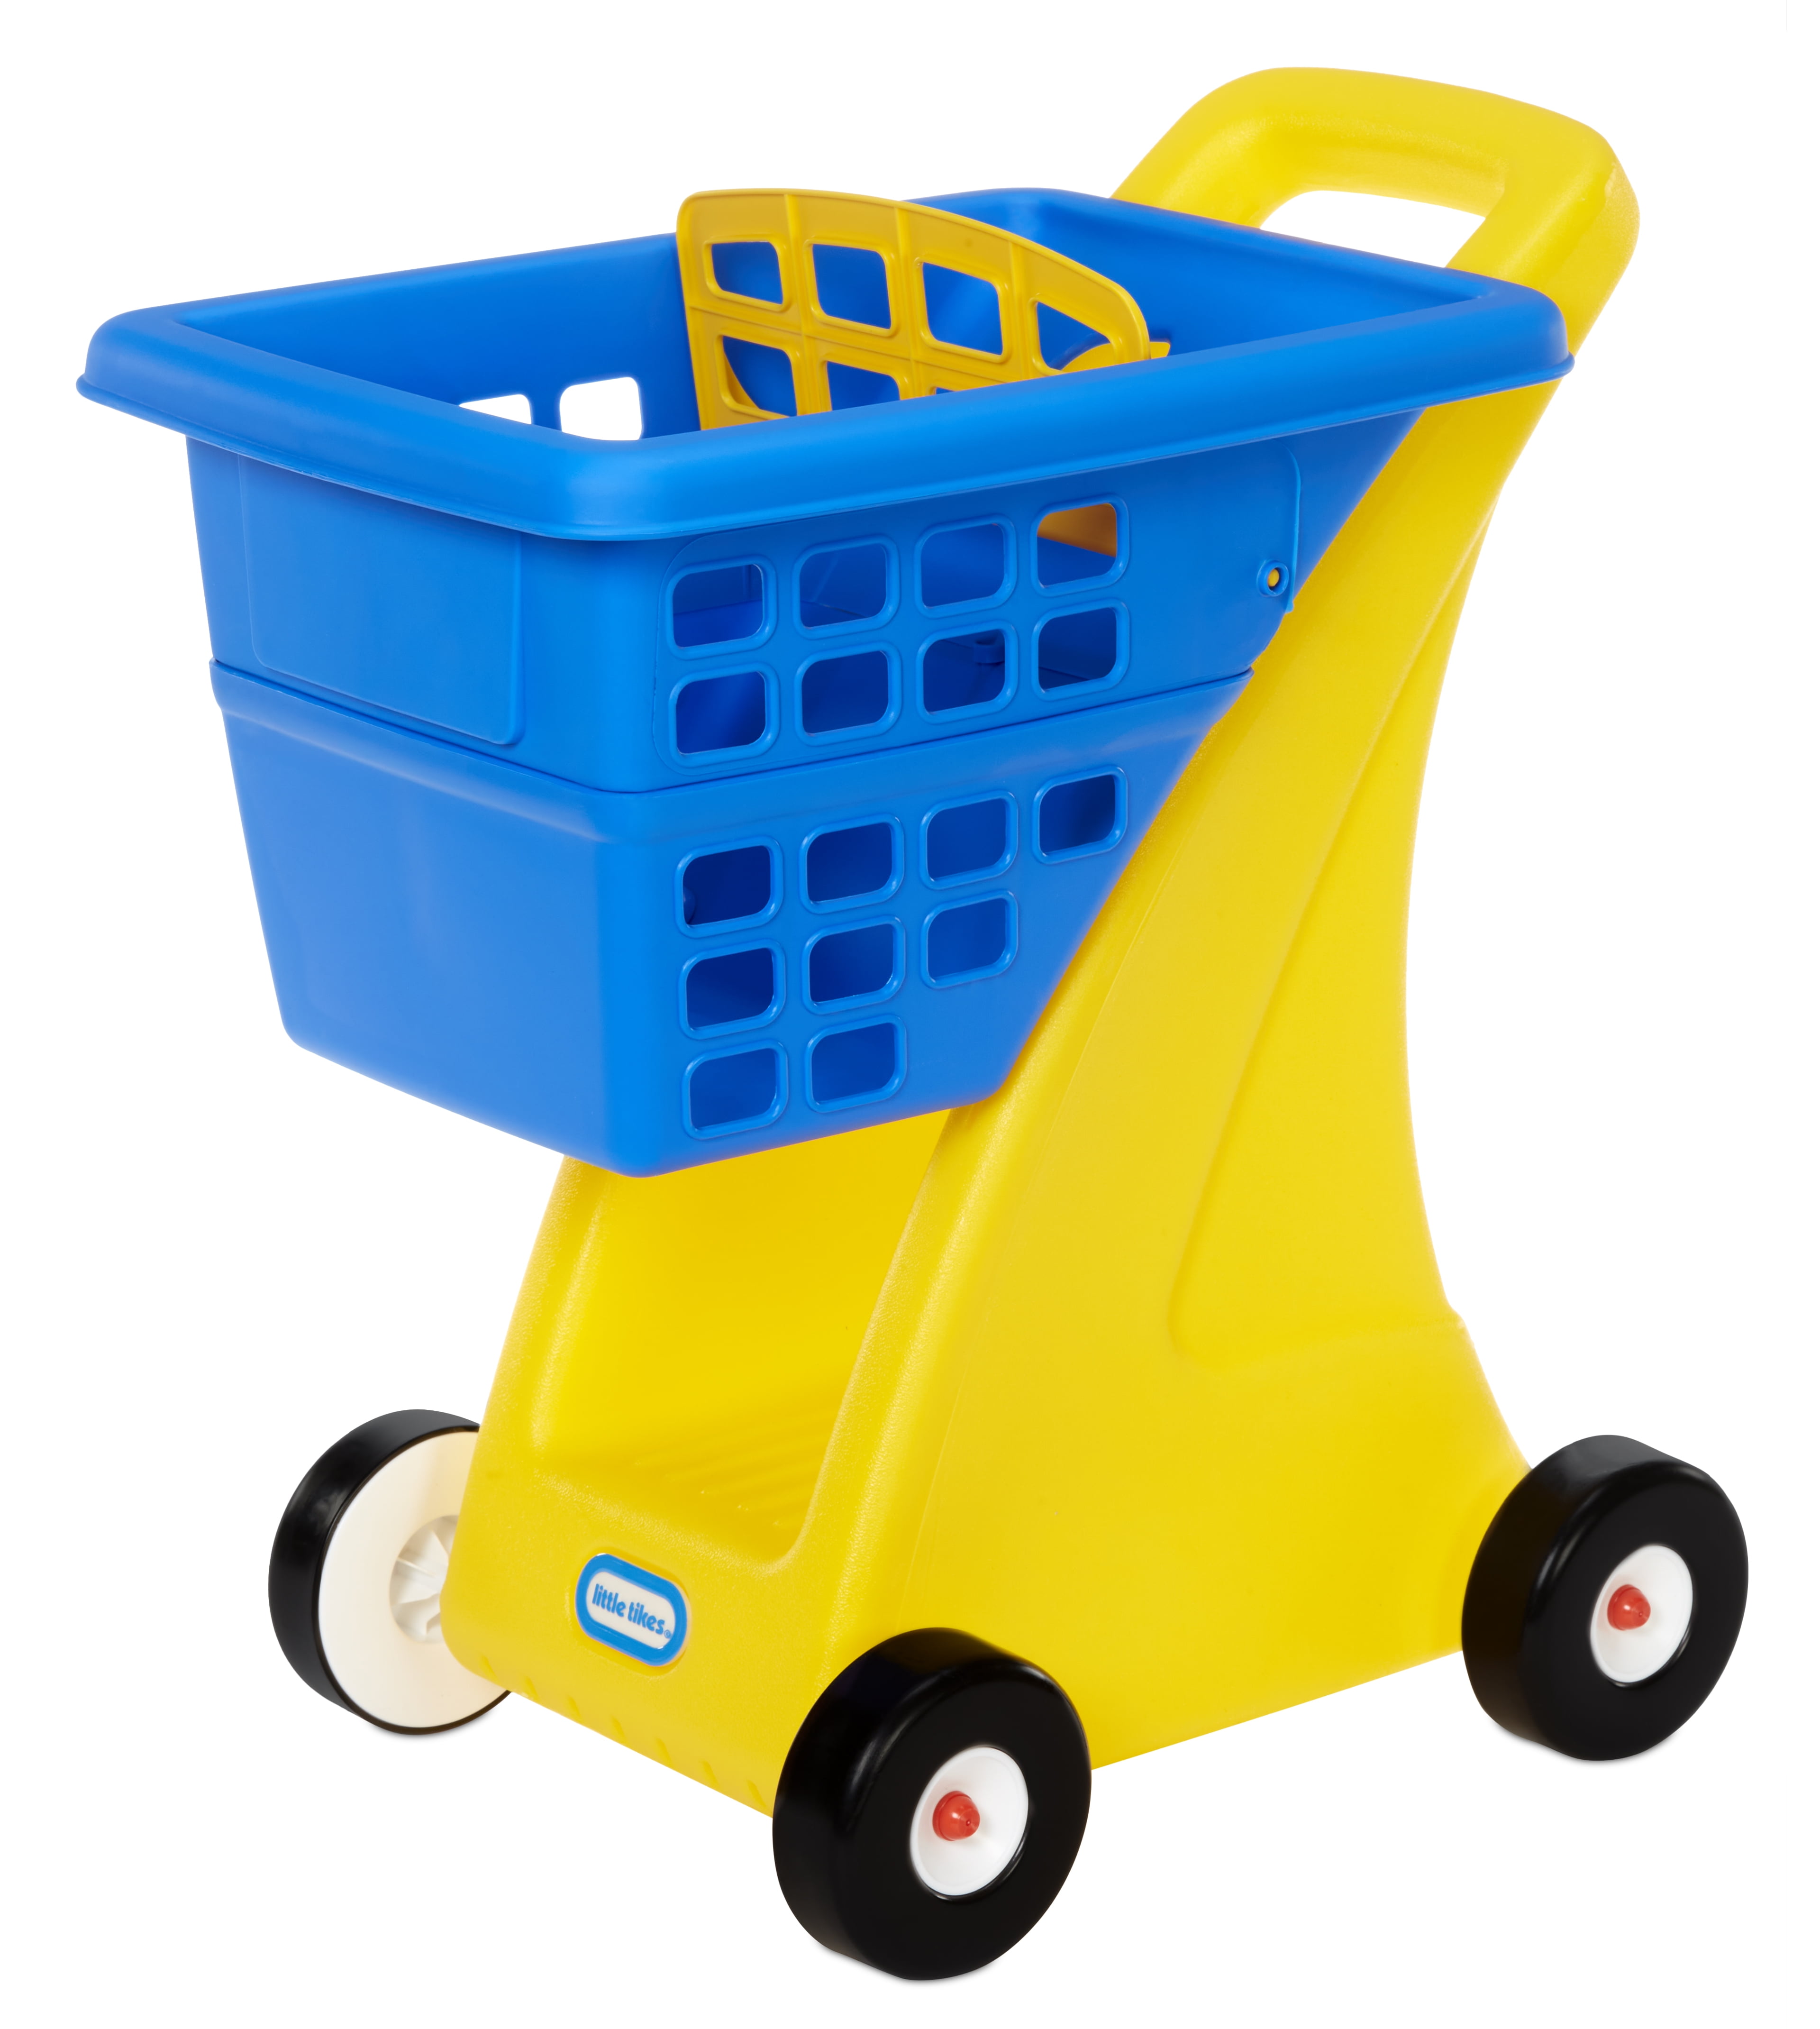 Details about   TOY's R US shopping cart Toy Kids Store Carts Shop Fun Blue Vintage 